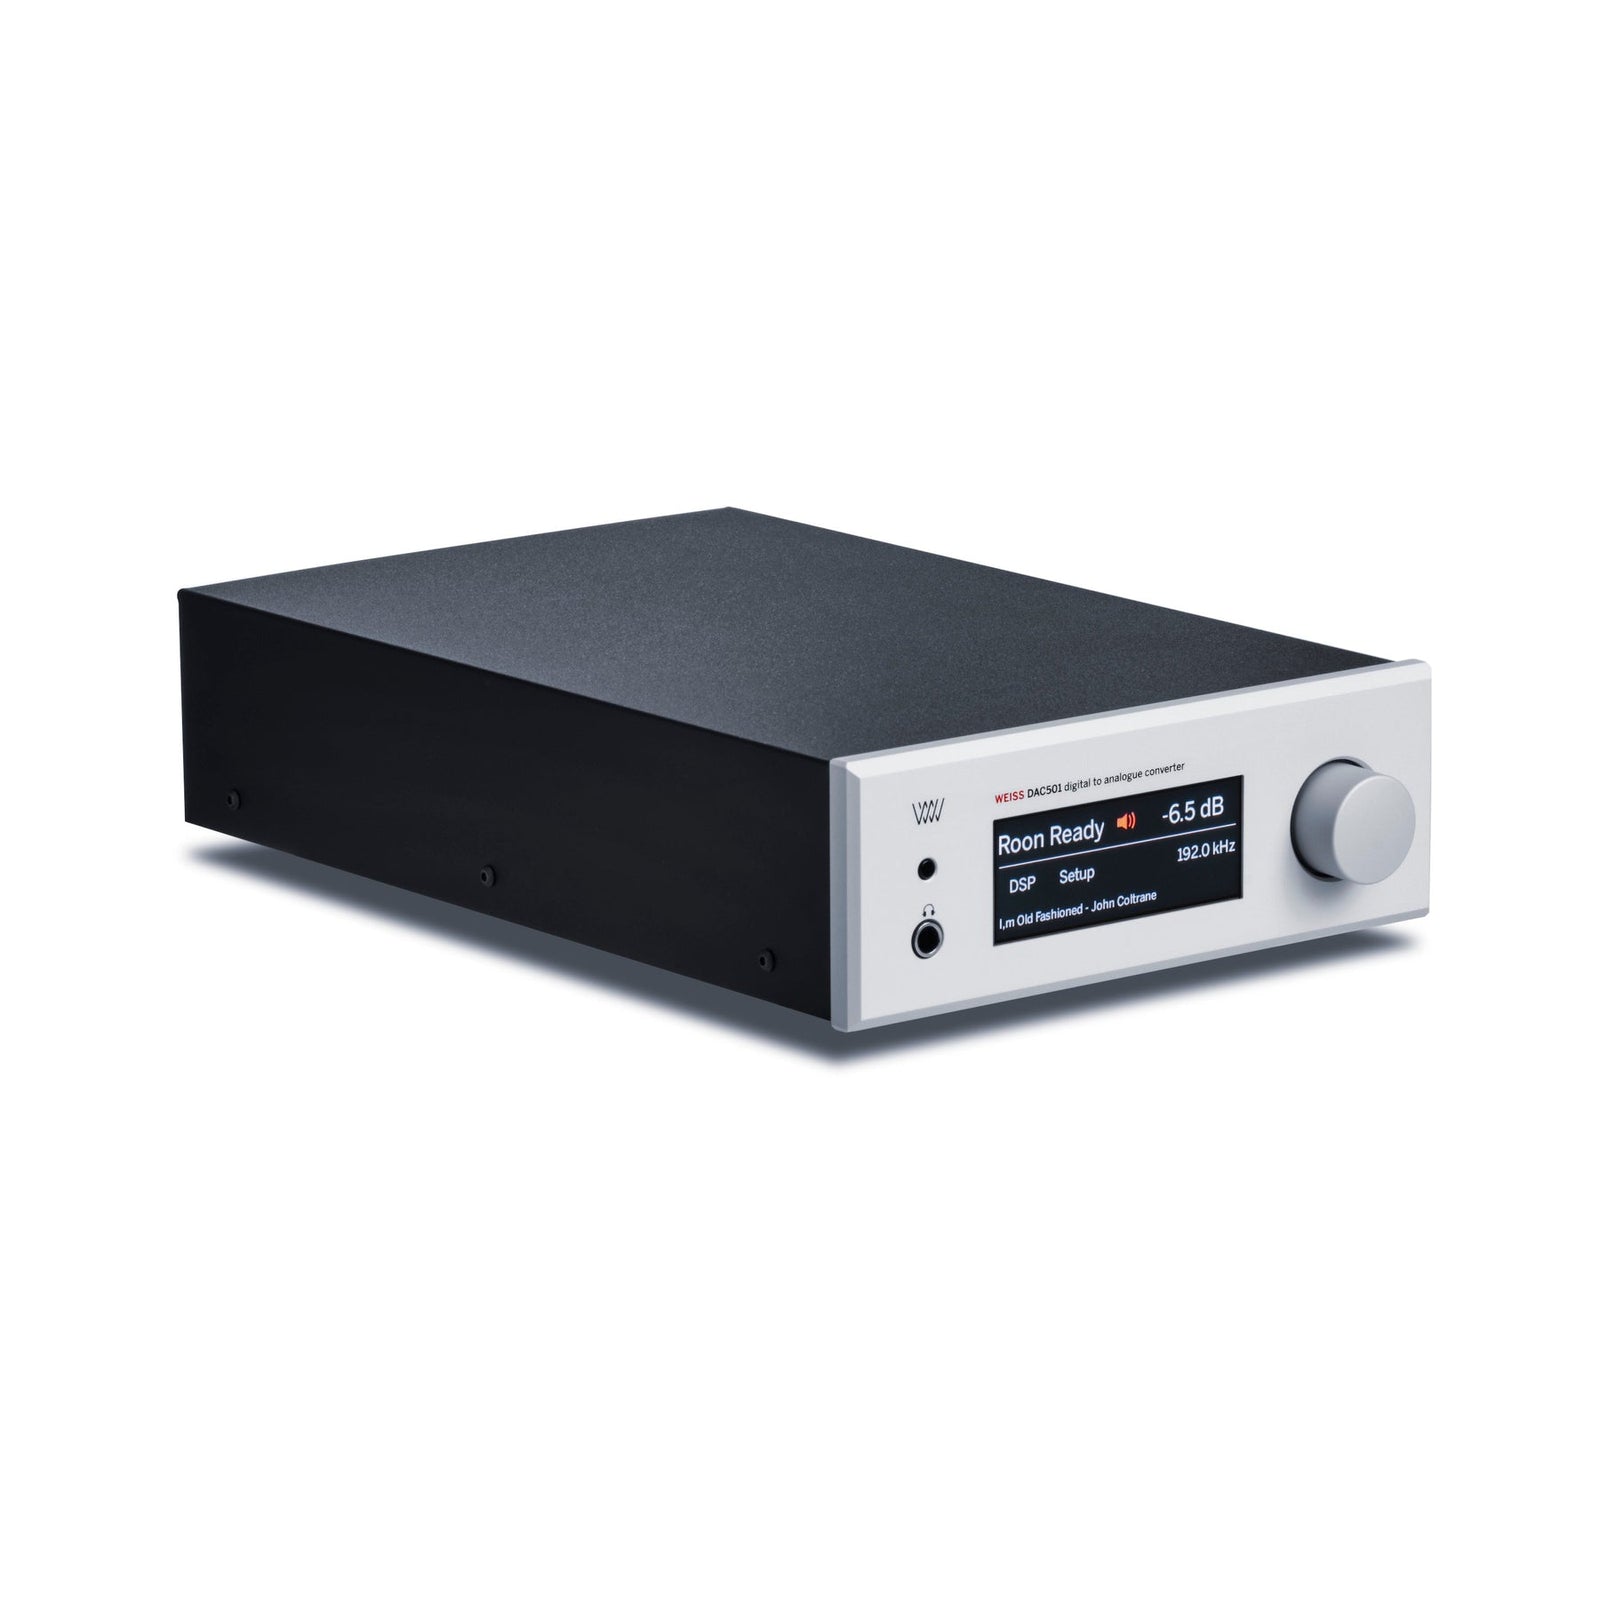 The DAC501 is a state of the art D/A Converter with an unprecedented level of sophistication and versatility. With the DAC501 is creating a new paradigm for what used to be a black box device. A typical D/A Converter is a "set and forget" device. Not so with the DAC501